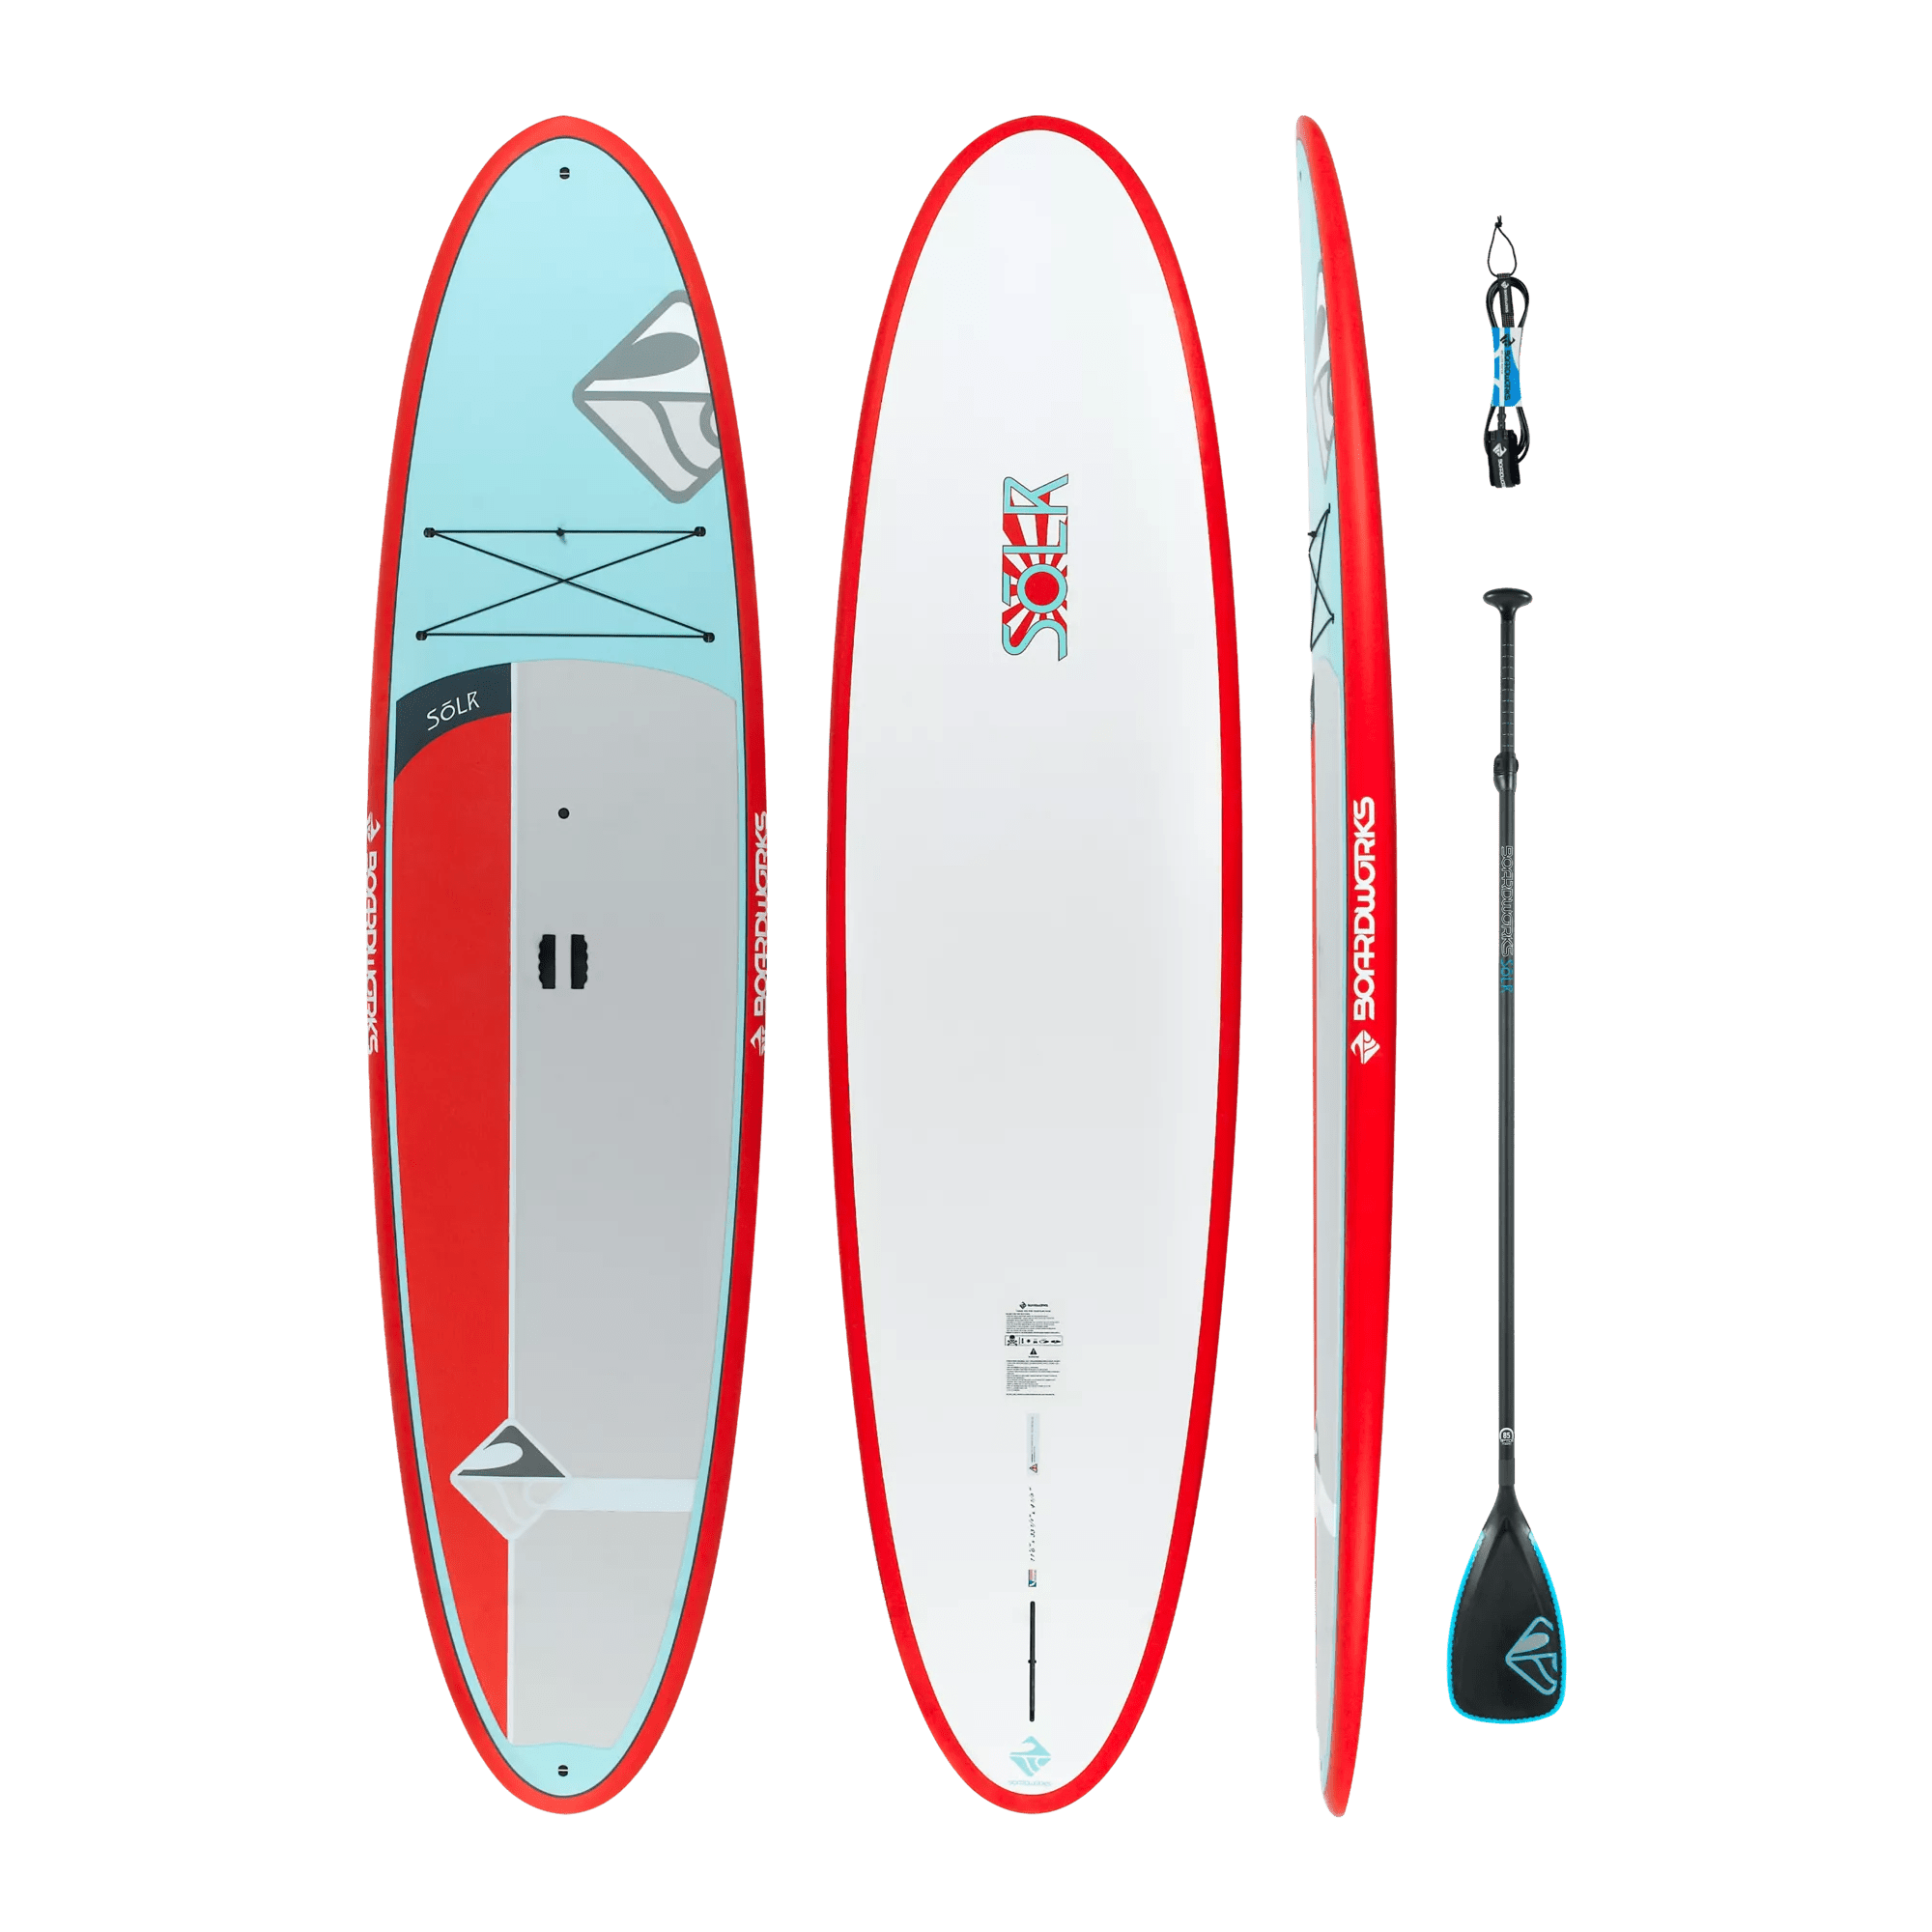 BOARDWORKS - Solr 11'6" All-Around Paddle Board with Paddle and Leash -  - 4440710526 - TOP 